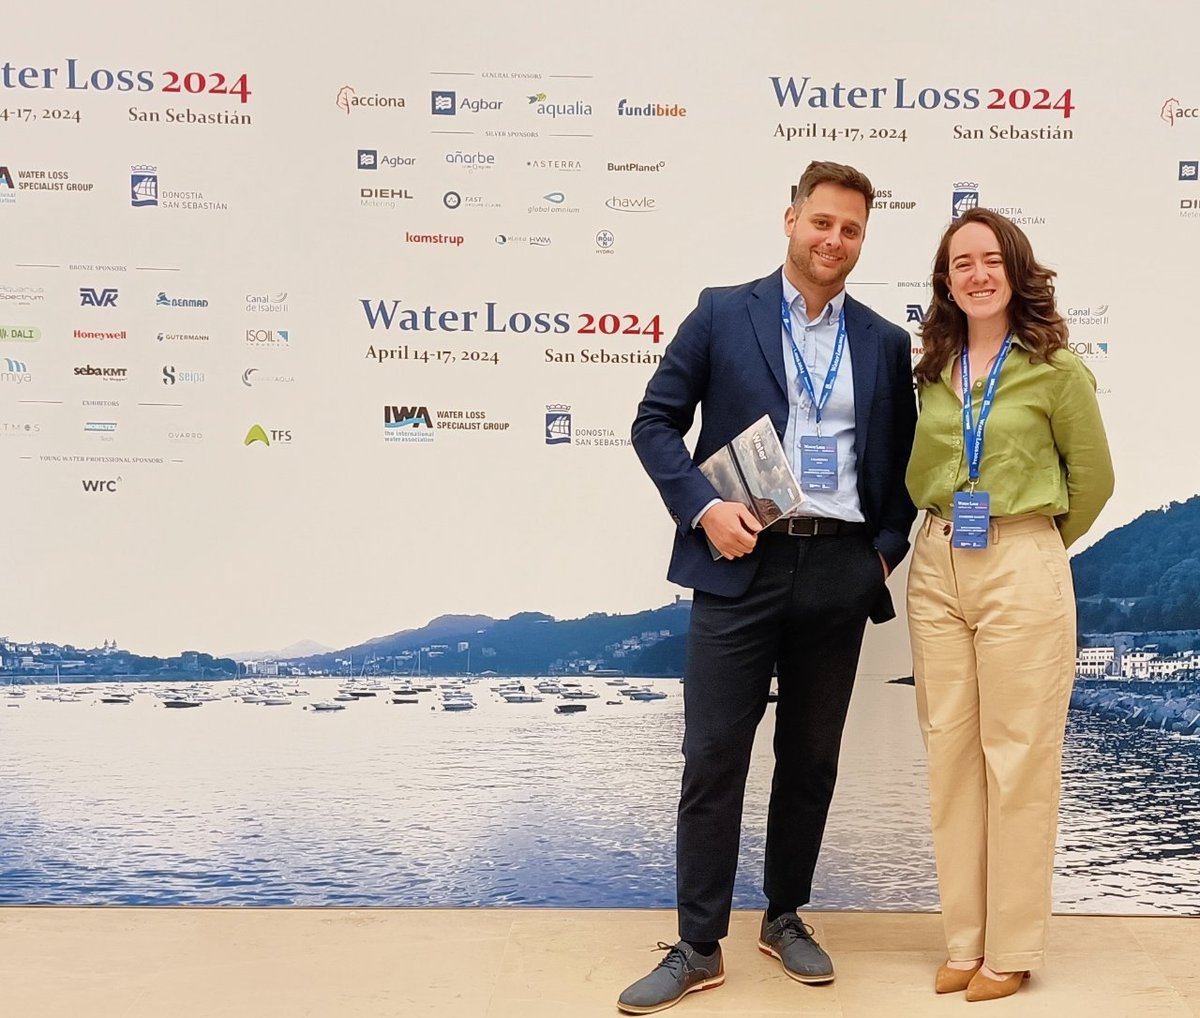 Very excited to represent IDOM at #WaterLoss2024 of IWAHQ in Donostia/San Sebastian. Exploring innovations for water management and contributing to #SustainableDevelopment. thanks for this enriching experience! #WaterManagement